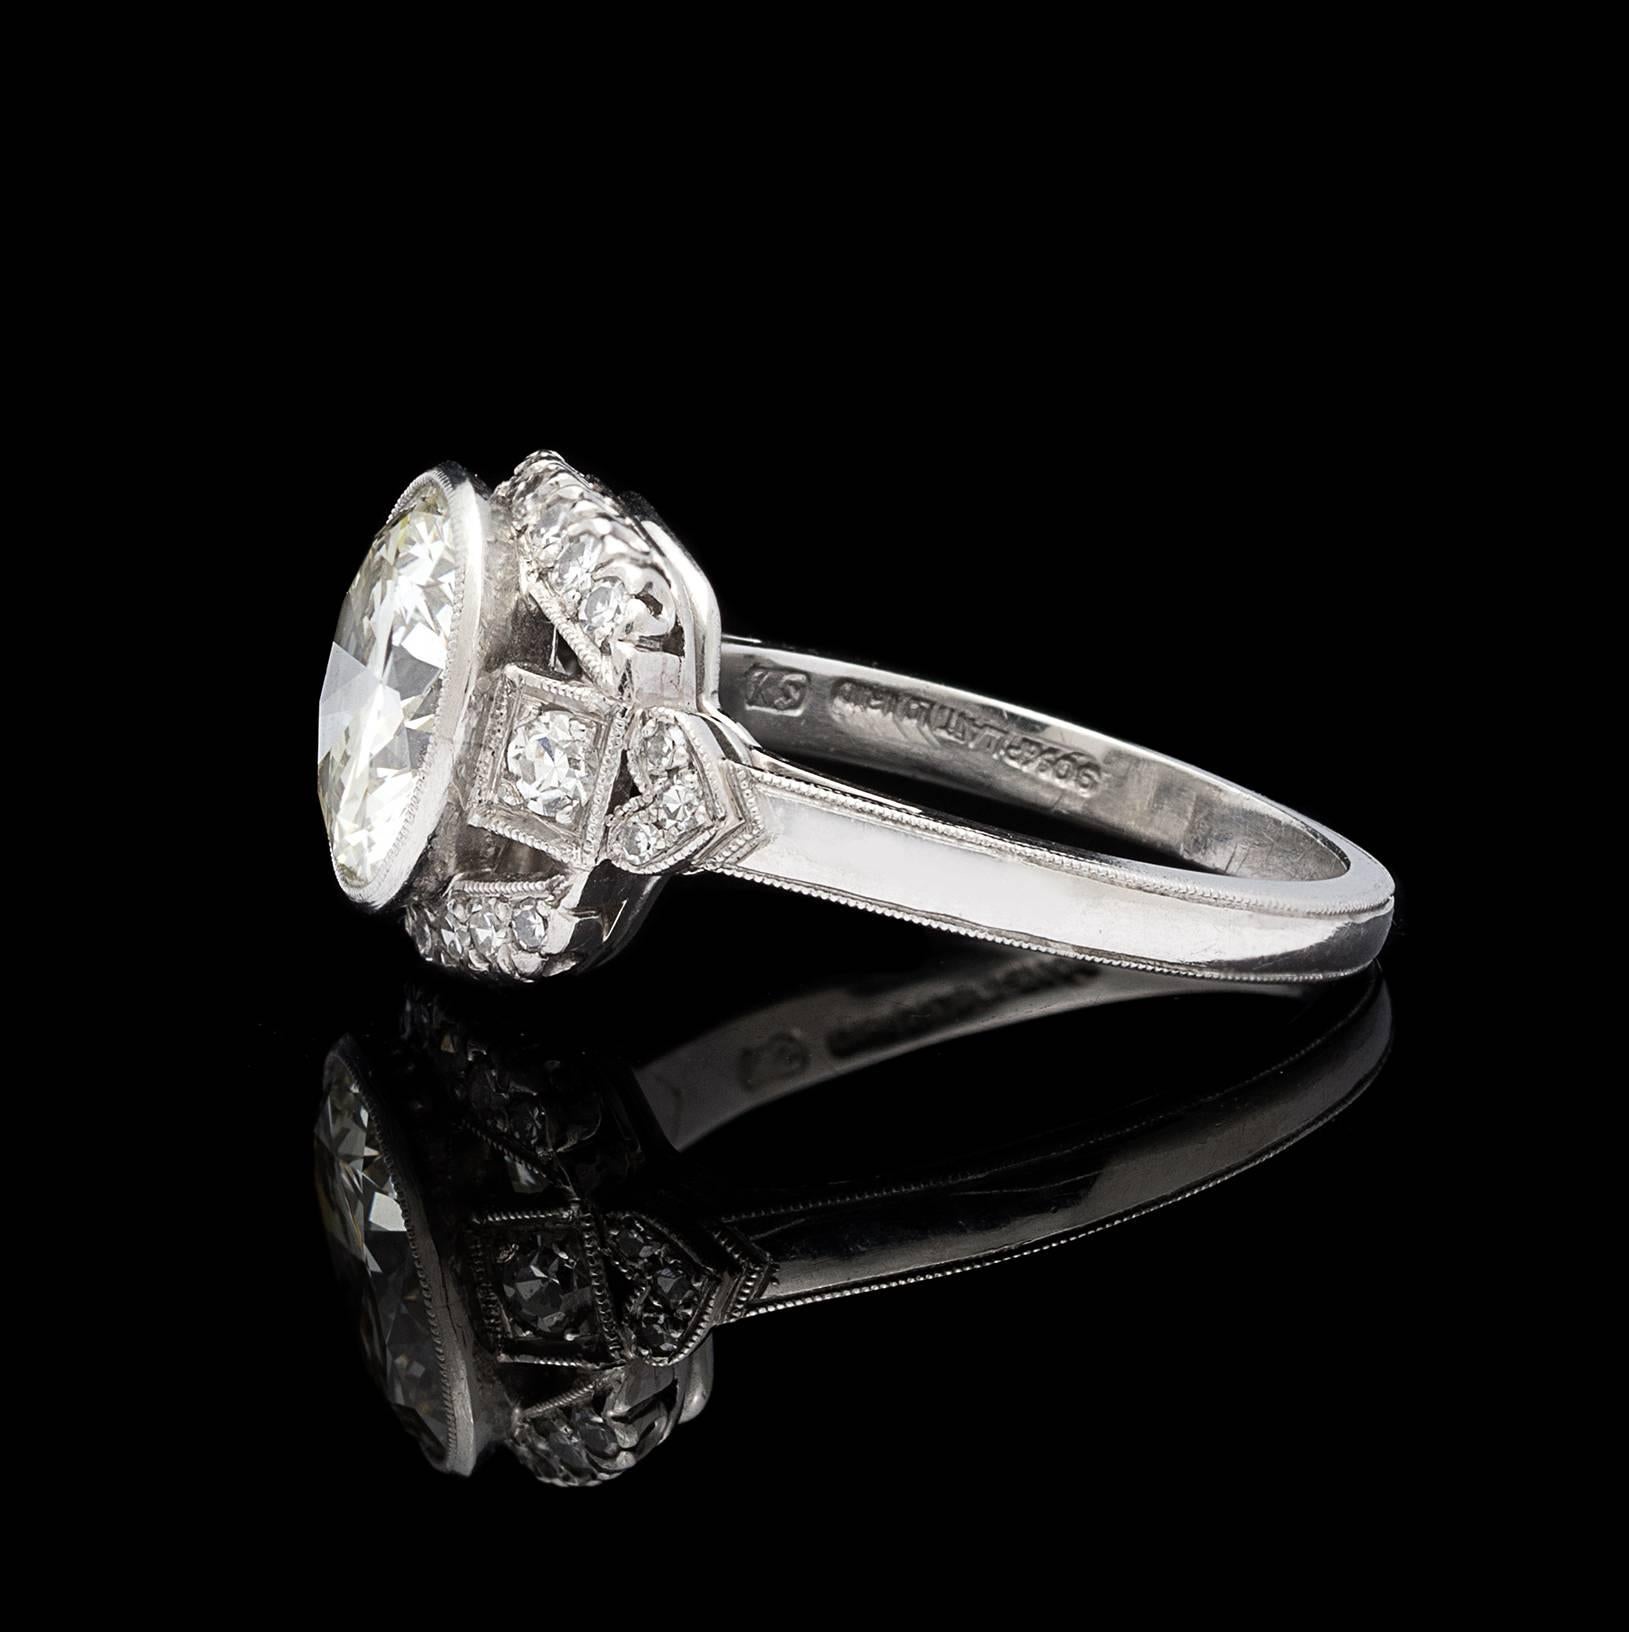 Brilliance and vintage appeal both in this stunner of a ring. Featuring a bezel-set round brilliant-cut diamond weighing 2.73 carats (K-L/VS), set with a tonneau-shaped mount, accented with 24 single-cut diamonds, with an estimated total diamond